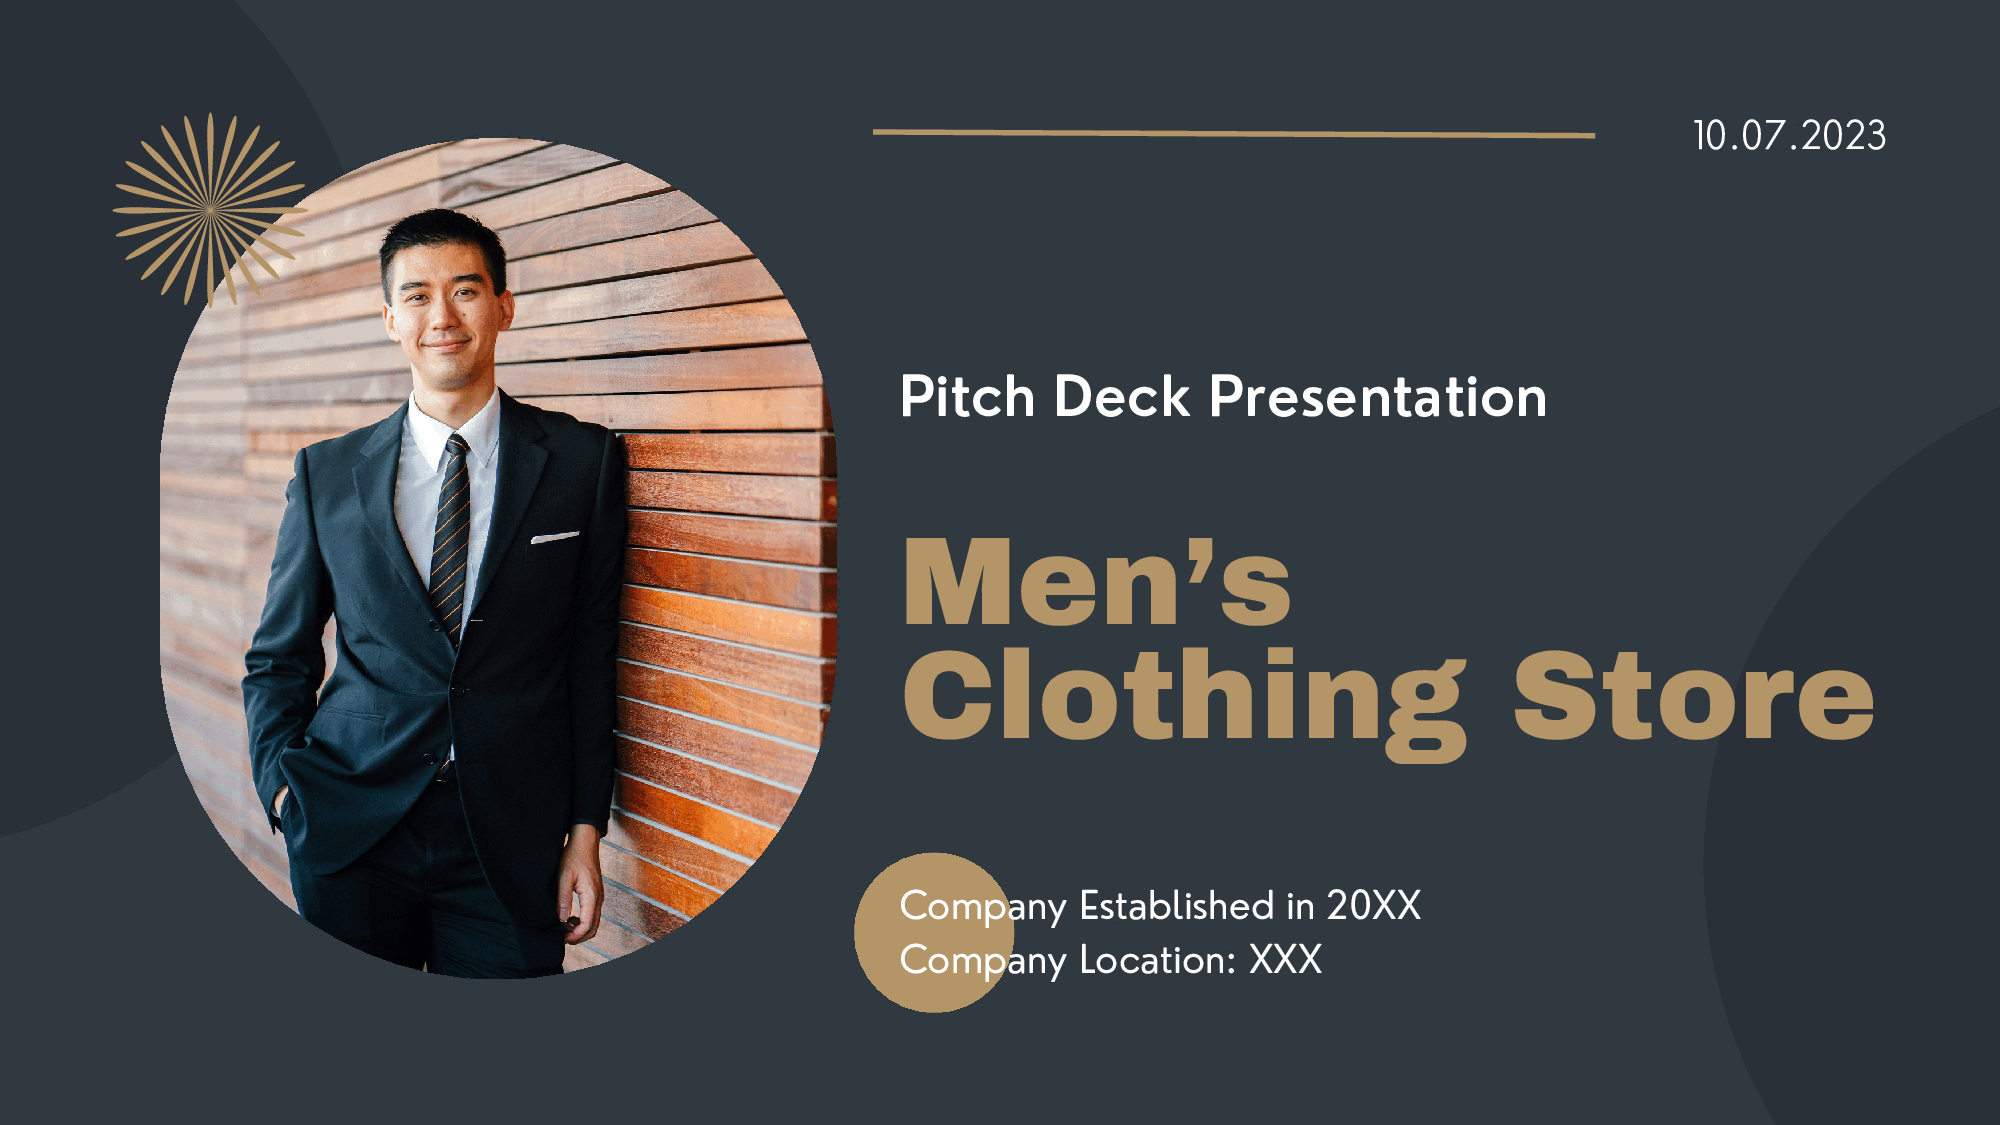 Men's Clothing Store Pitch Deck Template